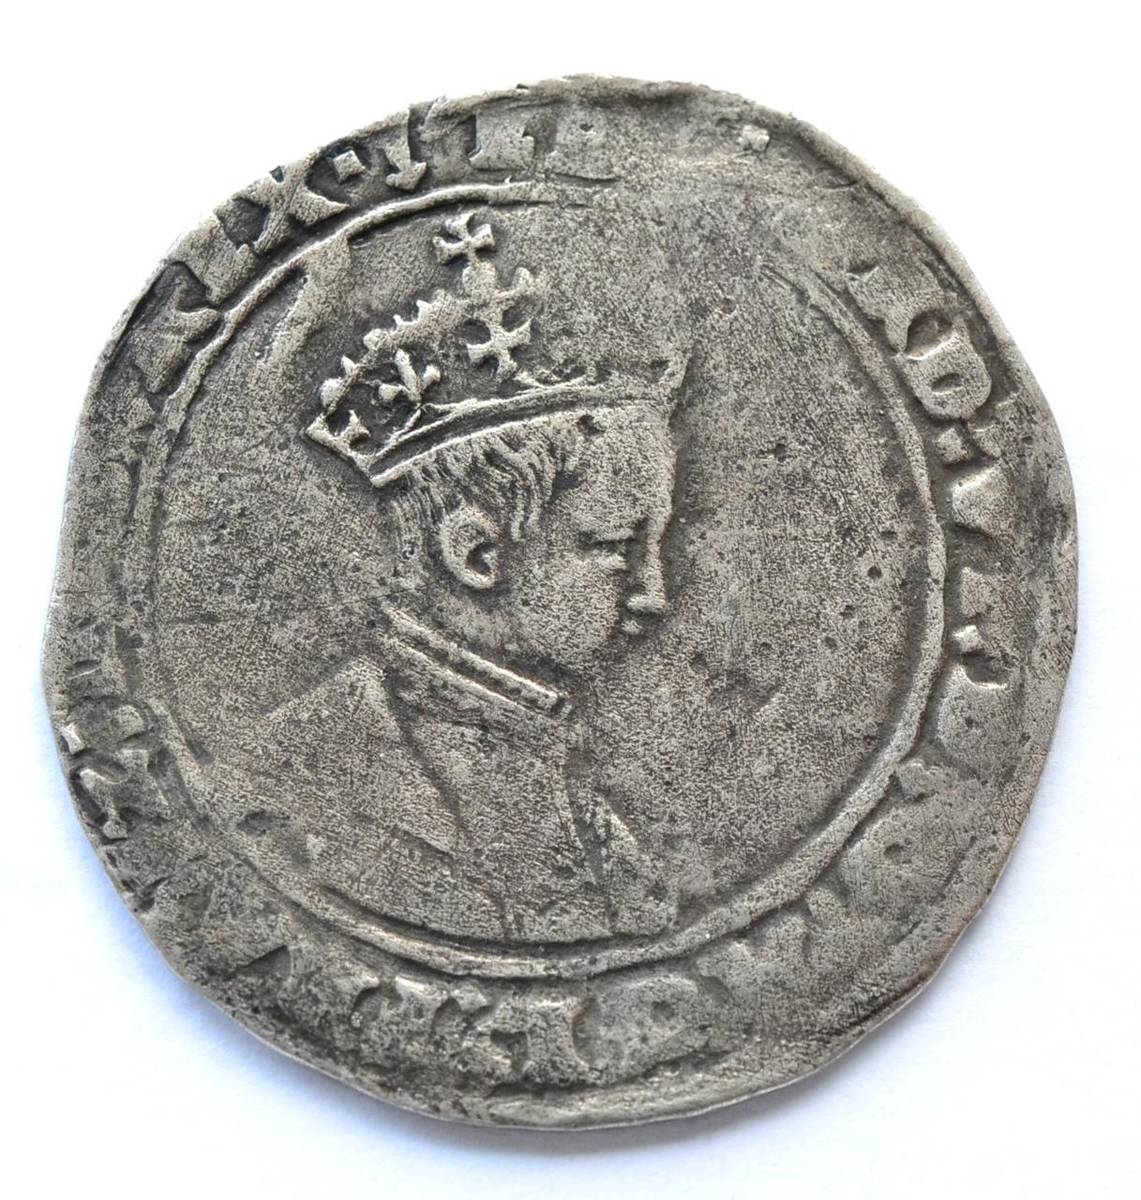 Lot 21 - Edward VI Shilling, debased silver, second issue (1549-1550) Tower Mint, MM arrow; obv. EDWARD...